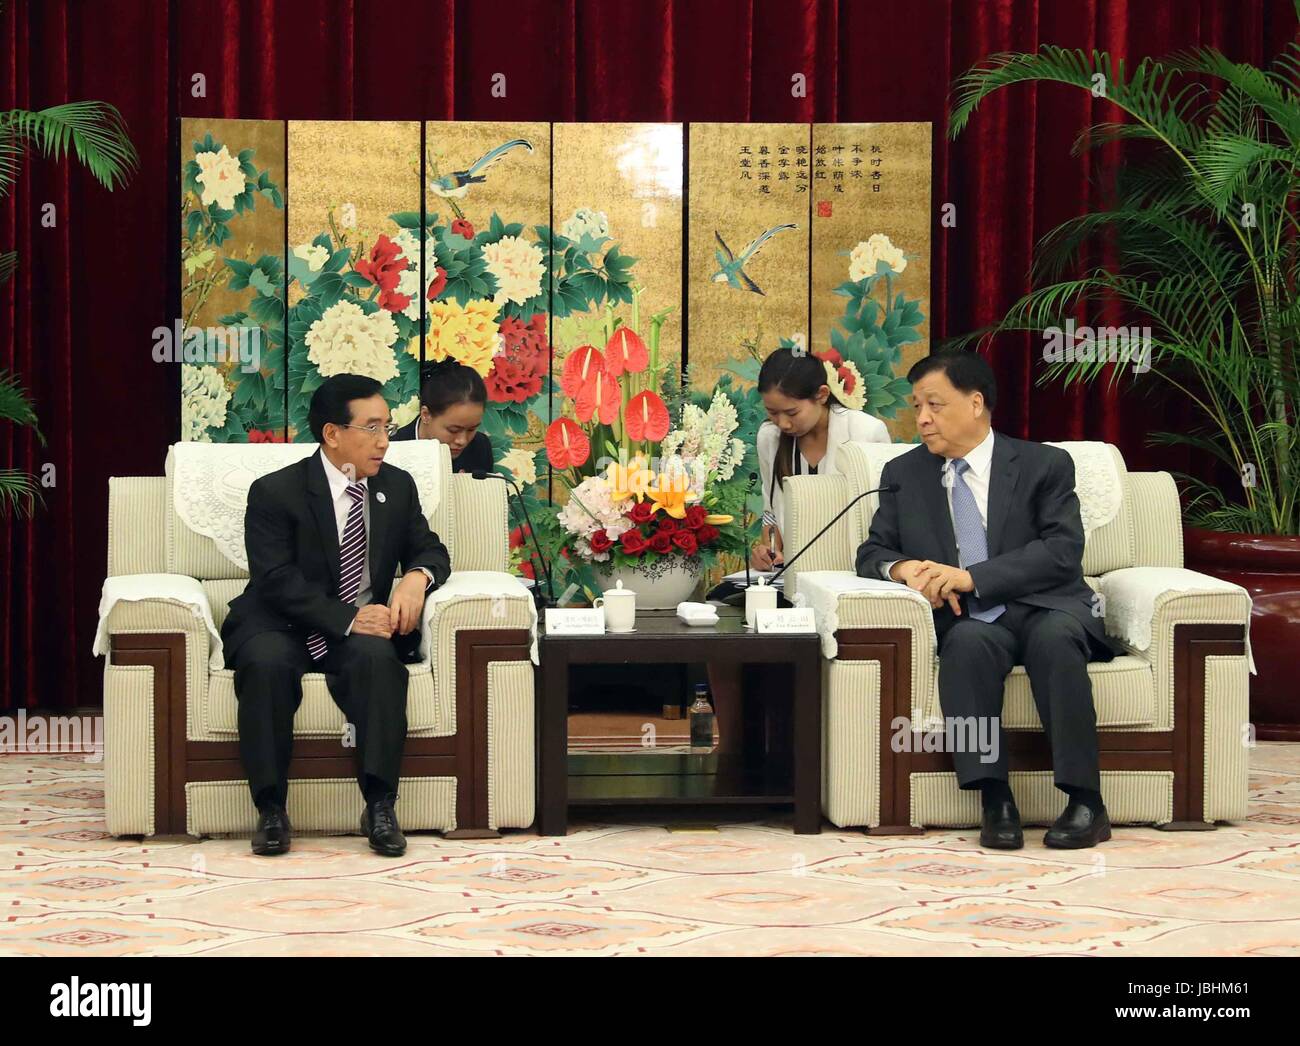 Fuzhou, China's Fujian Province. 11th June, 2017. Liu Yunshan (R), a member of the Standing Committee of the Political Bureau of the Communist Party of China (CPC) Central Committee, meets with Phankham Viphavanh, a member of the Political Bureau of the Lao People's Revolutionary Party (PRP) Central Committee and vice president of Laos, in Fuzhou, capital of southeast China's Fujian Province, June 11, 2017. Credit: Liu Weibing/Xinhua/Alamy Live News Stock Photo